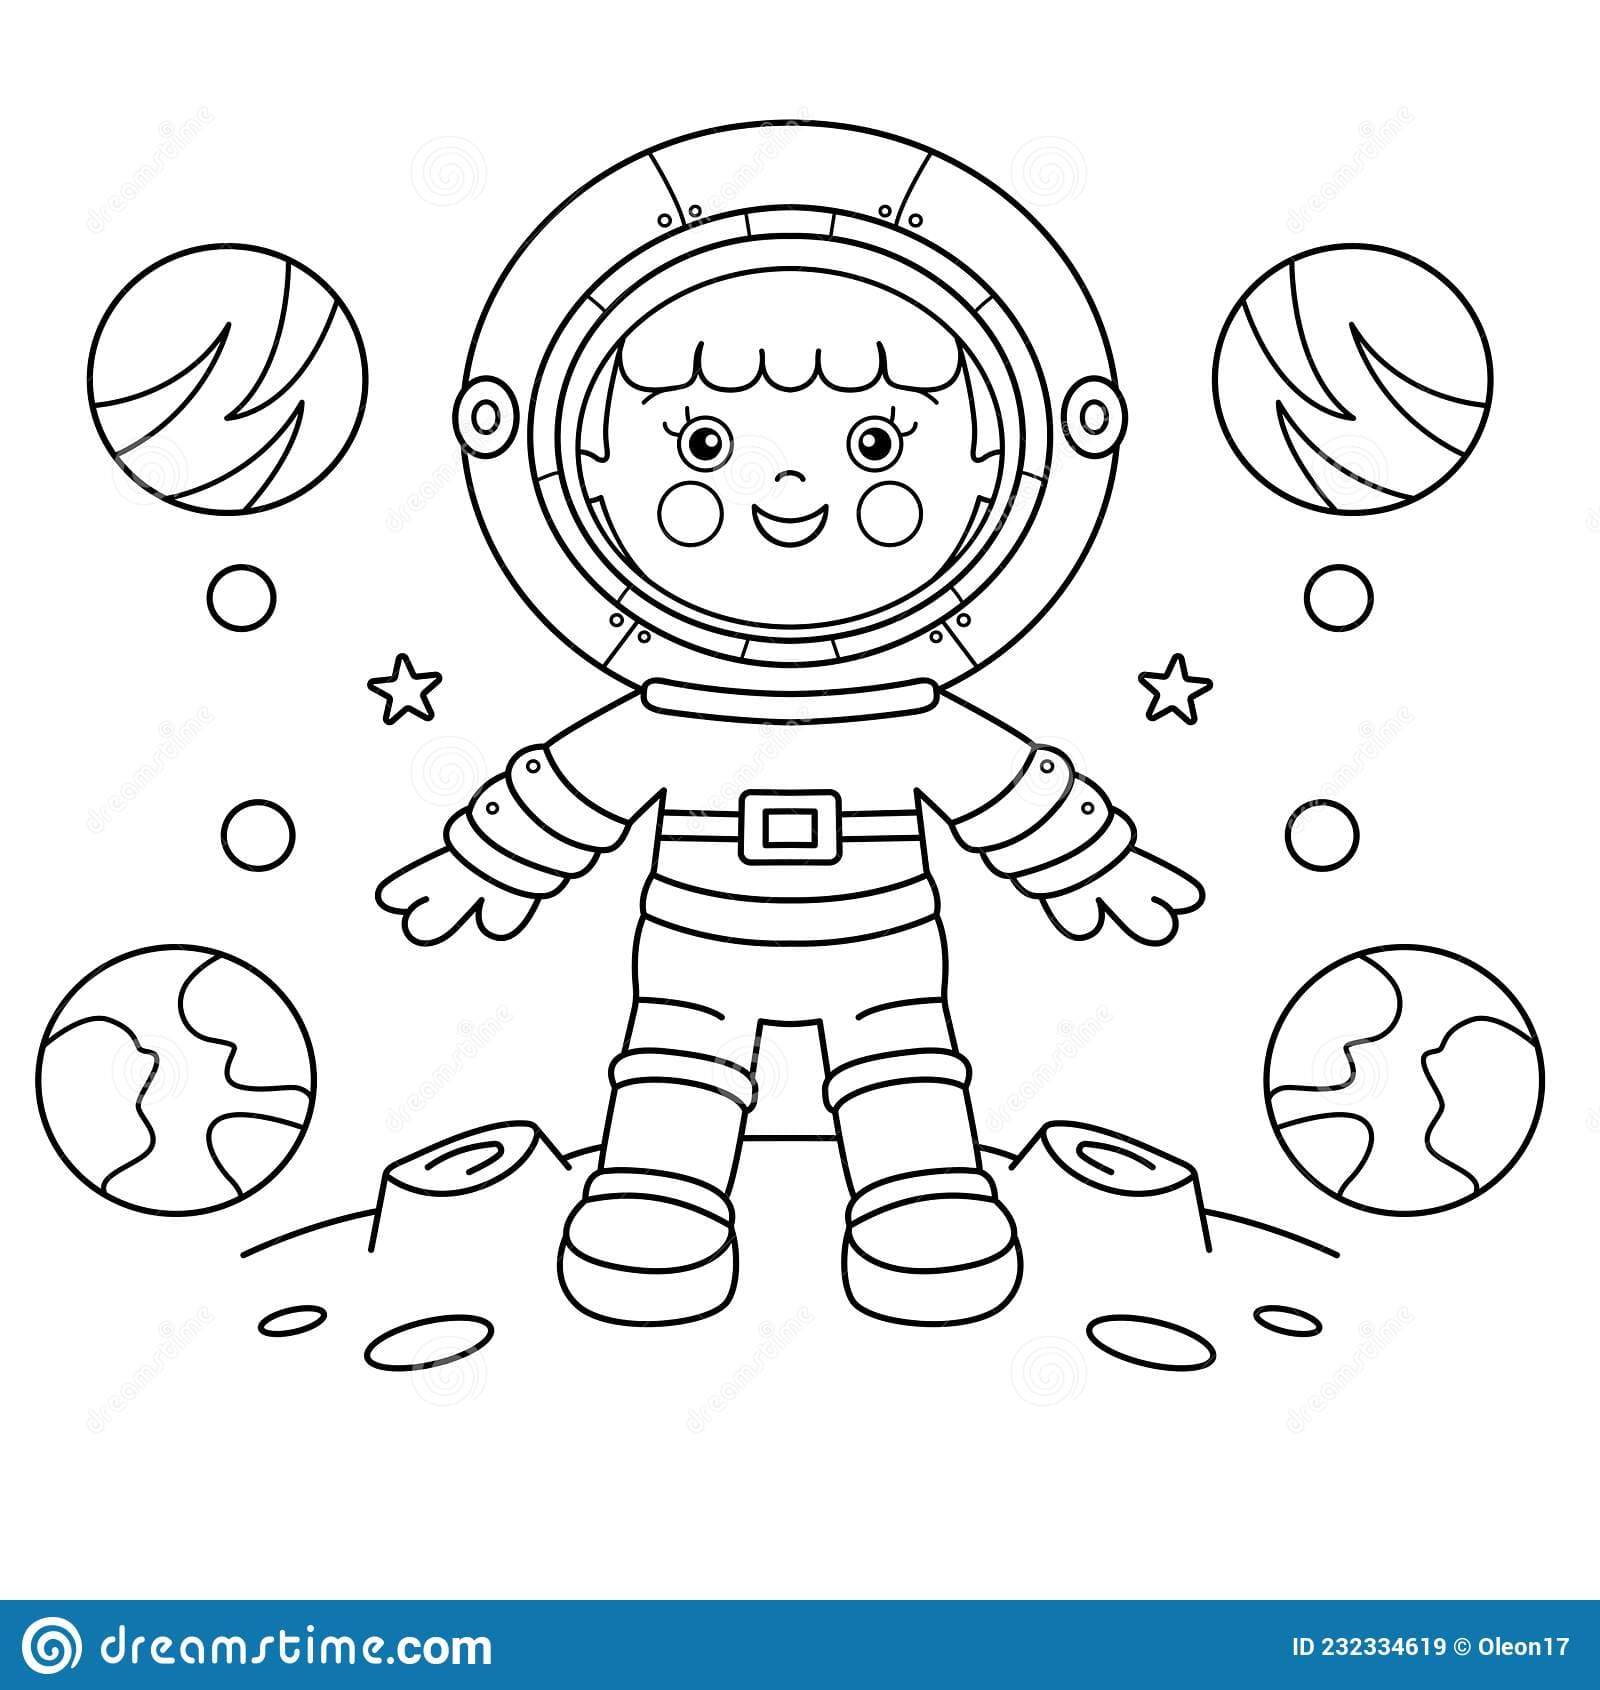 Coloring Page Outline Of a cartoon astronaut in spacesuit on planet Coloring Page